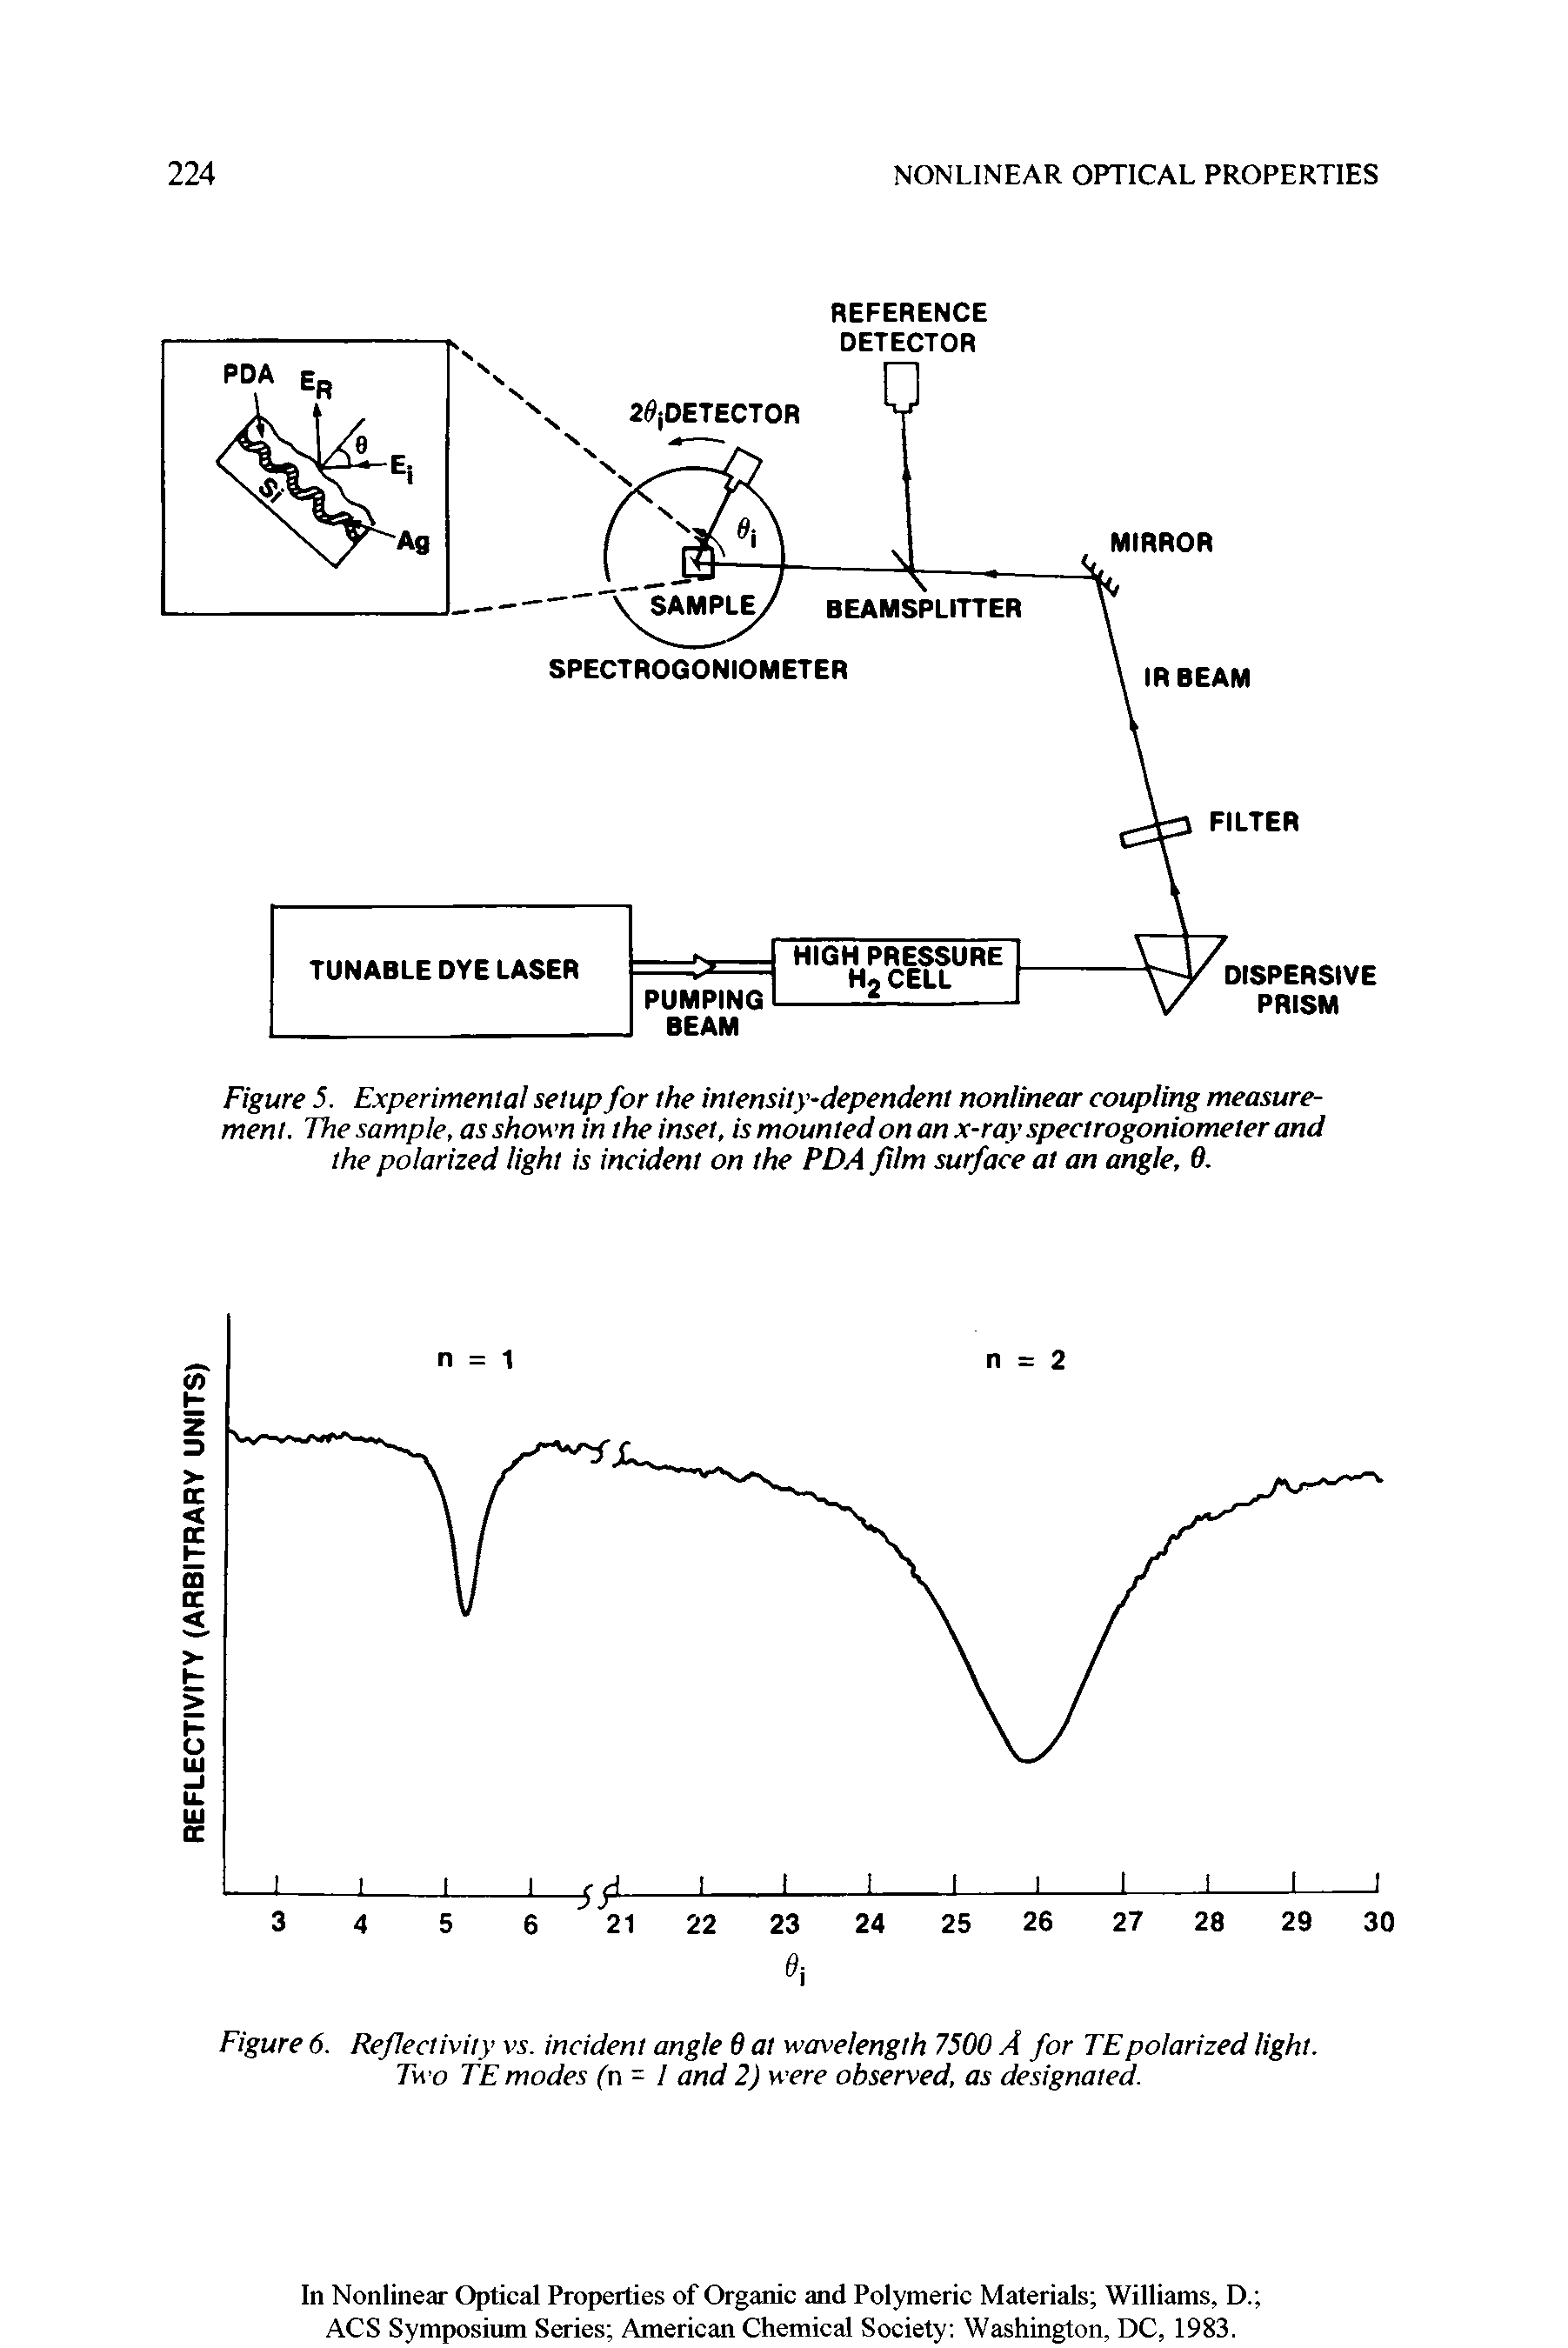 Figure 6. Reflectivity vs. incident angle 6 at wavelength 7500 A for TEpolarized light. Two TE modes (n - I and 2) were observed, as designated.